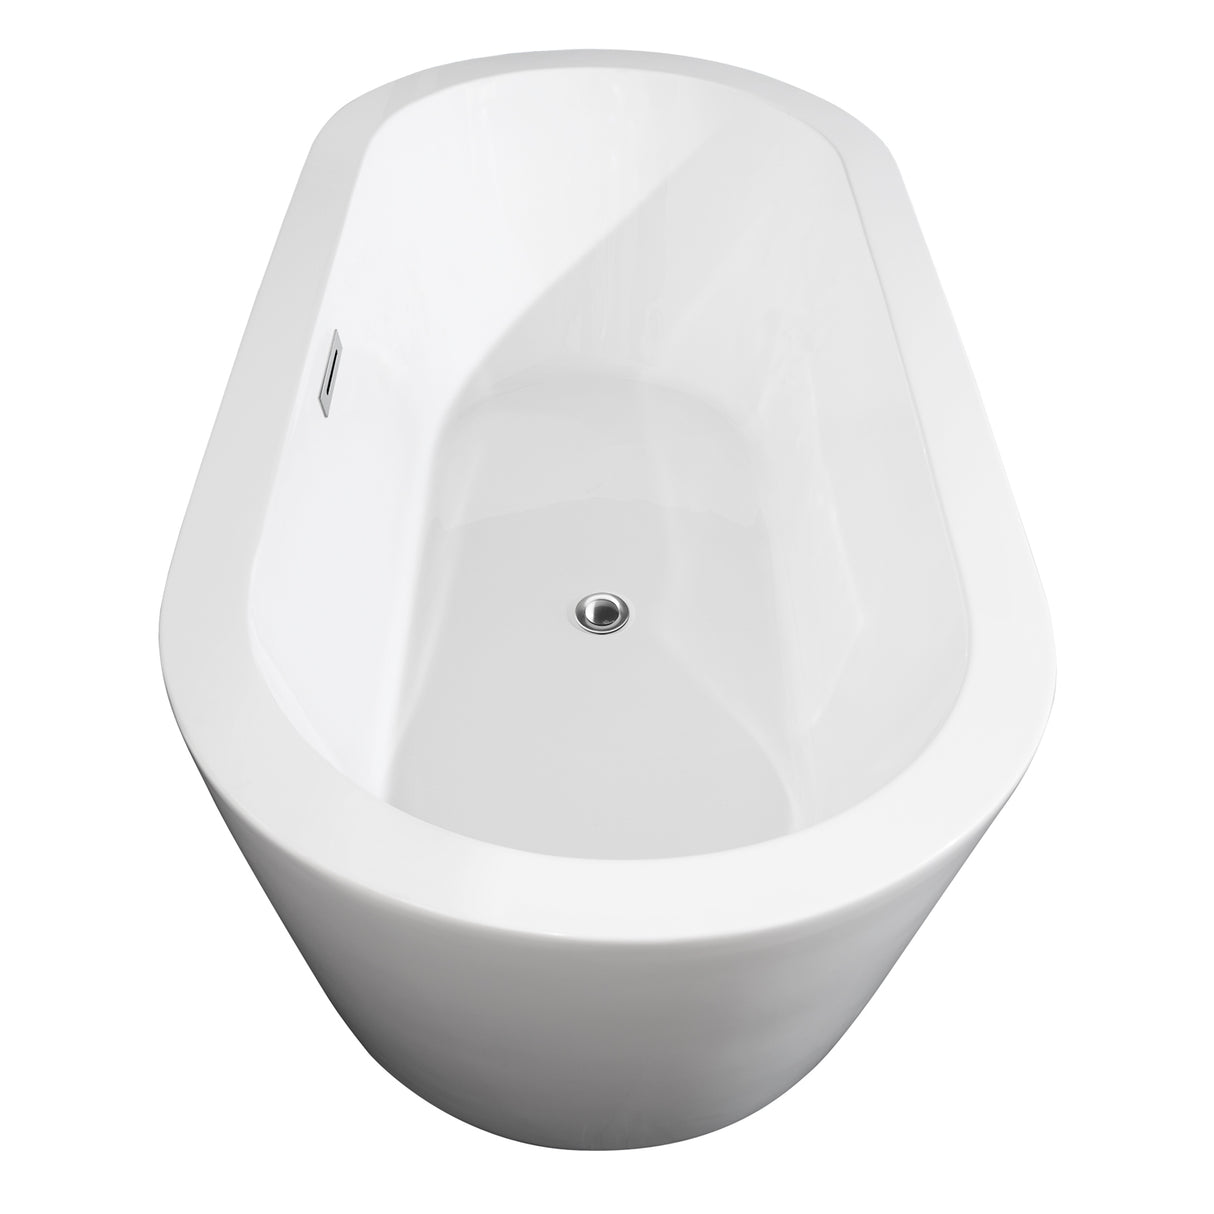 Mermaid 71 Inch Freestanding Bathtub in White with Polished Chrome Drain and Overflow Trim